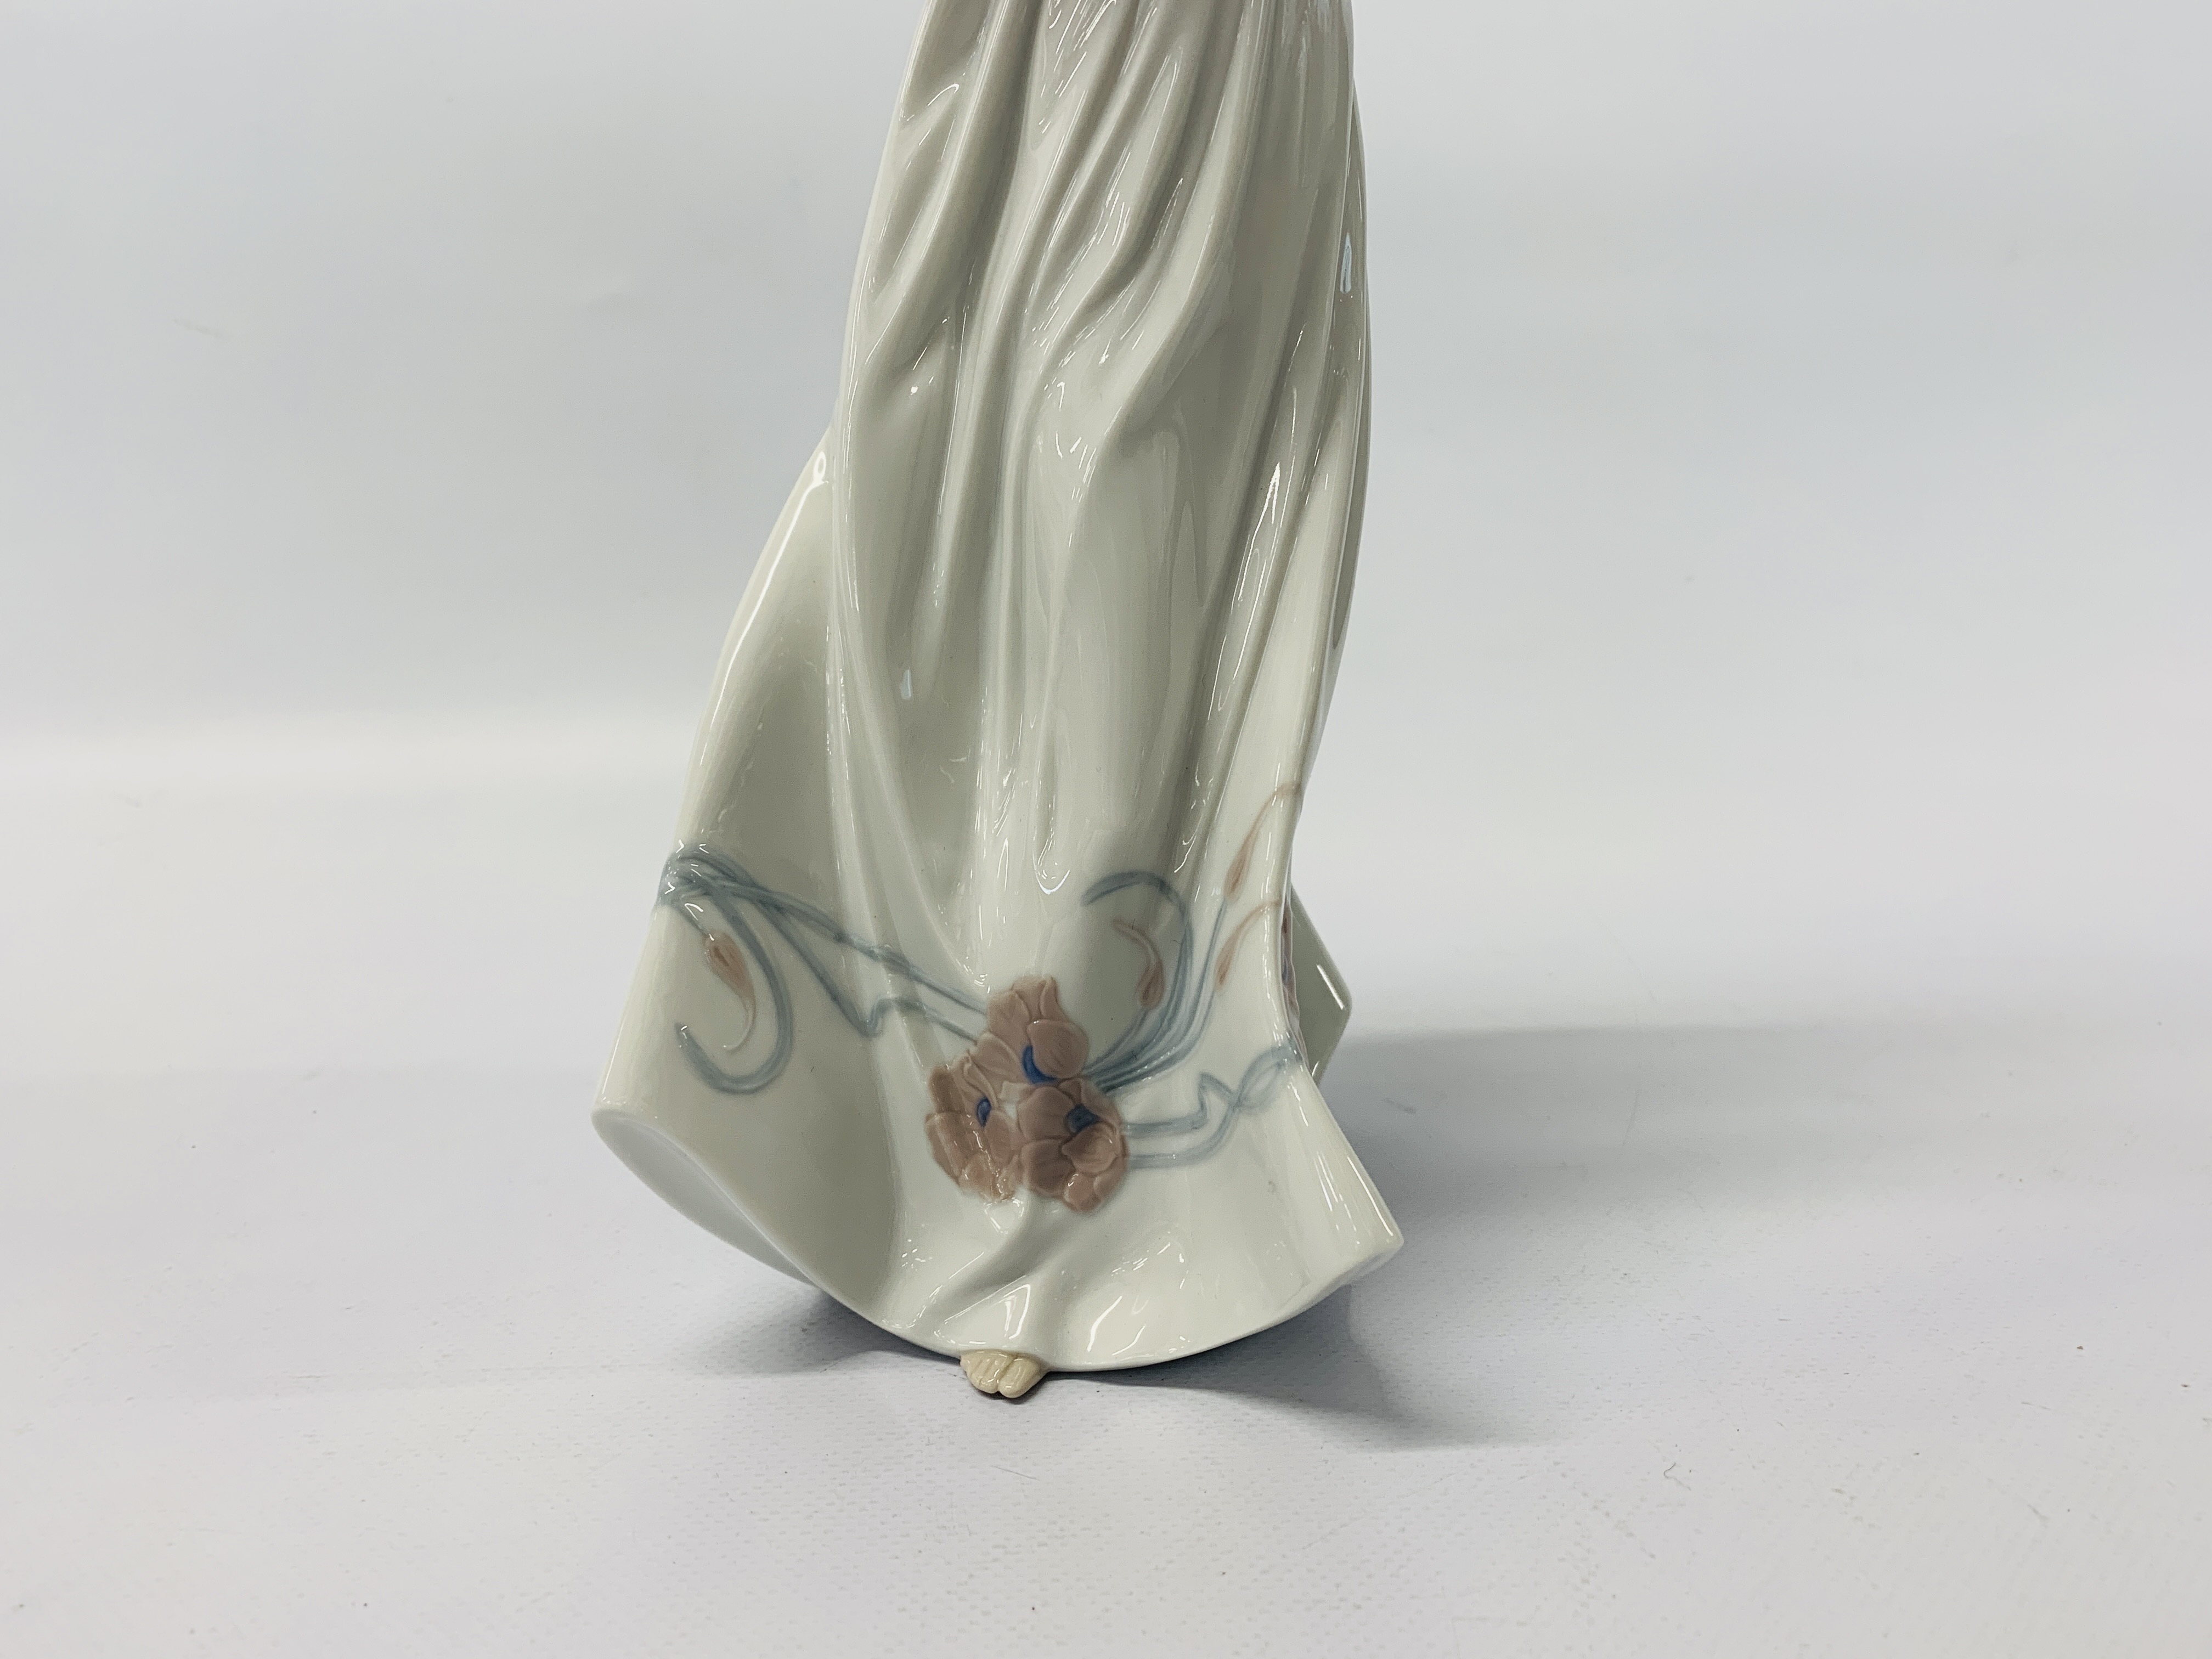 LLADRO FIGURINE 6777 "BUTTERFLY TREASURES" 32 CM. - Image 6 of 7